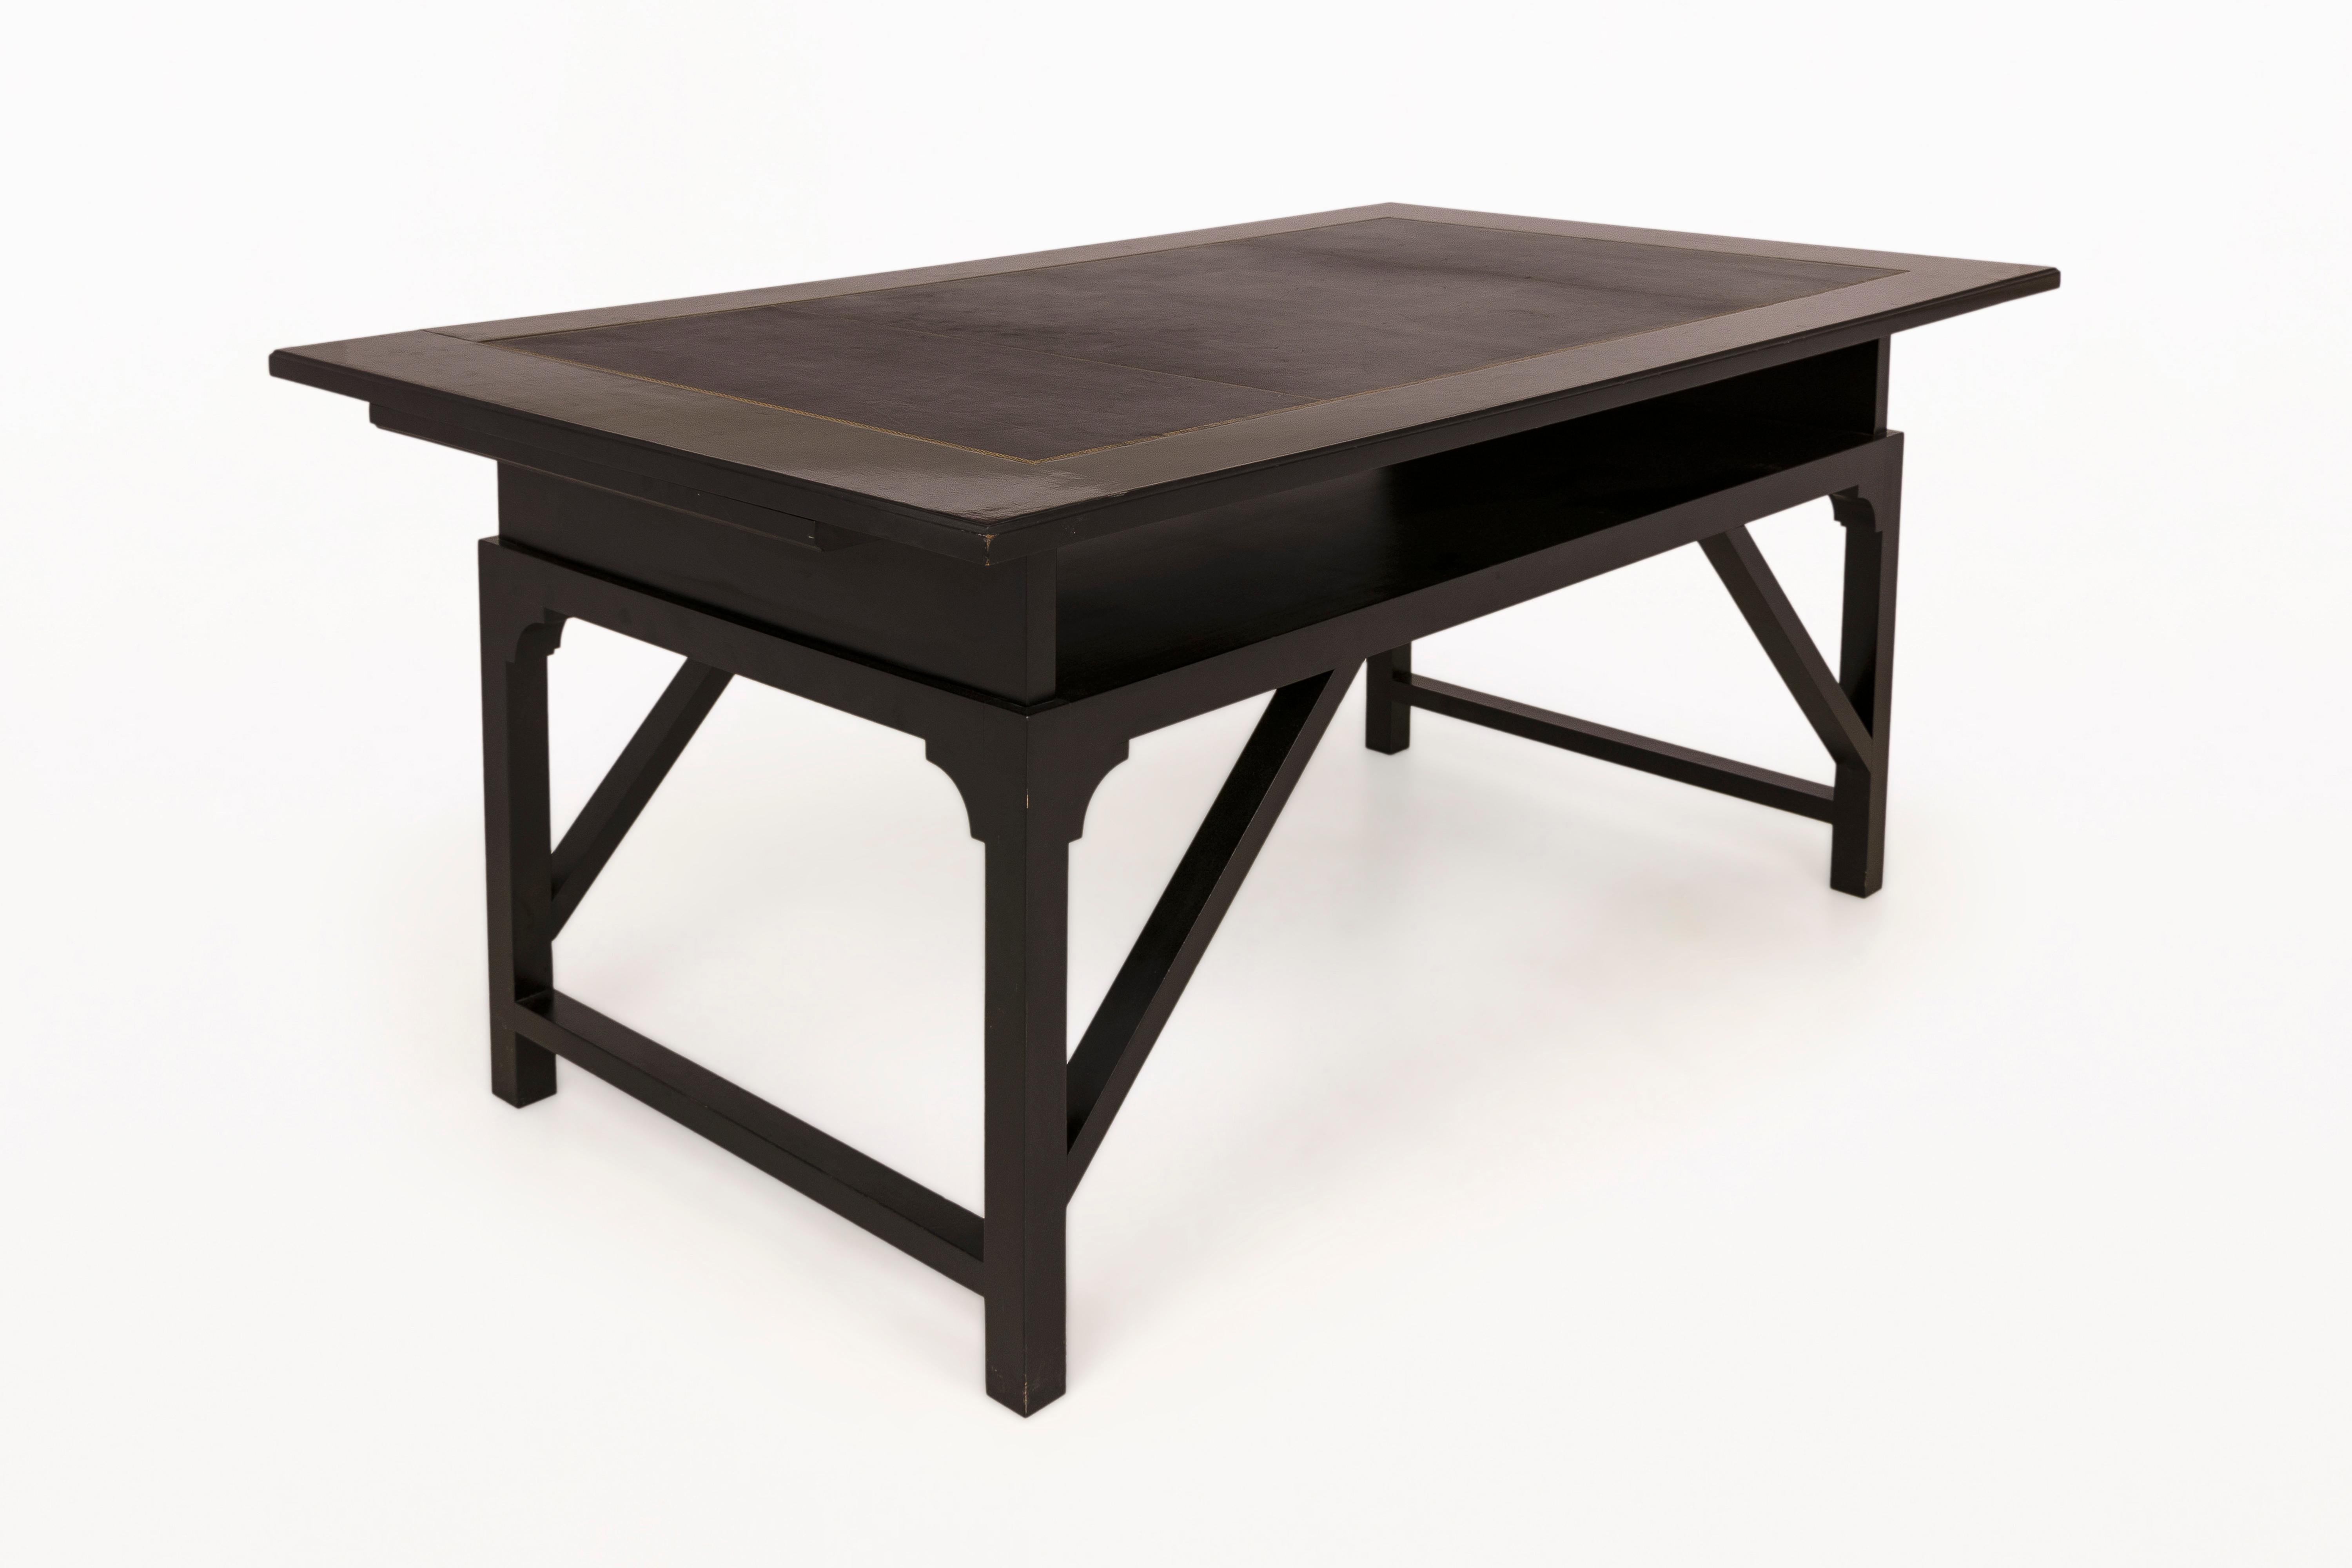 David Hicks desk.
Black lacquered wooden desk with two superimposed extension panels on either side with an open drawer space in the center.
Leather inlay desk top.
Elegant and modern design.
Manufacturer Christian Badin,
circa 1960,